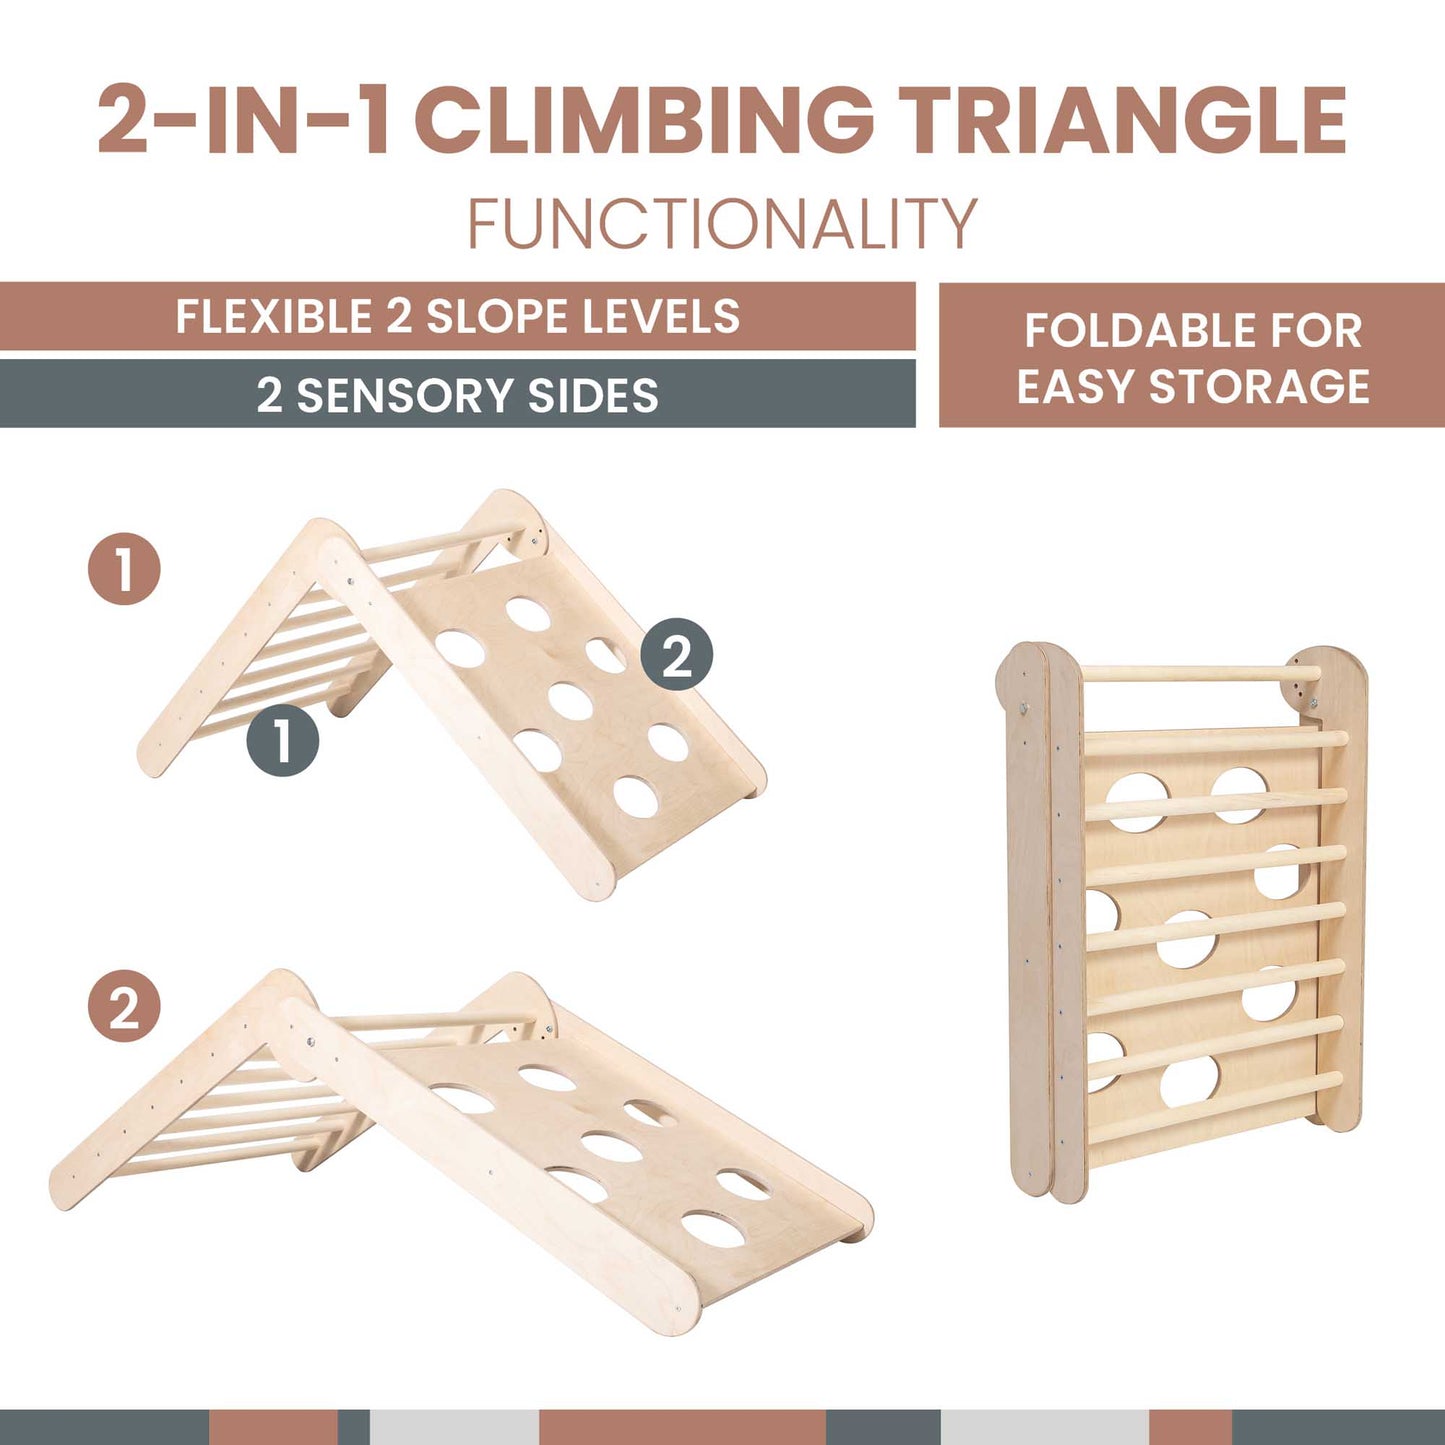 Transformable climbing triangle with two sensory sides and slope levels, showcasing its versatile design. Folds easily for convenient storage.